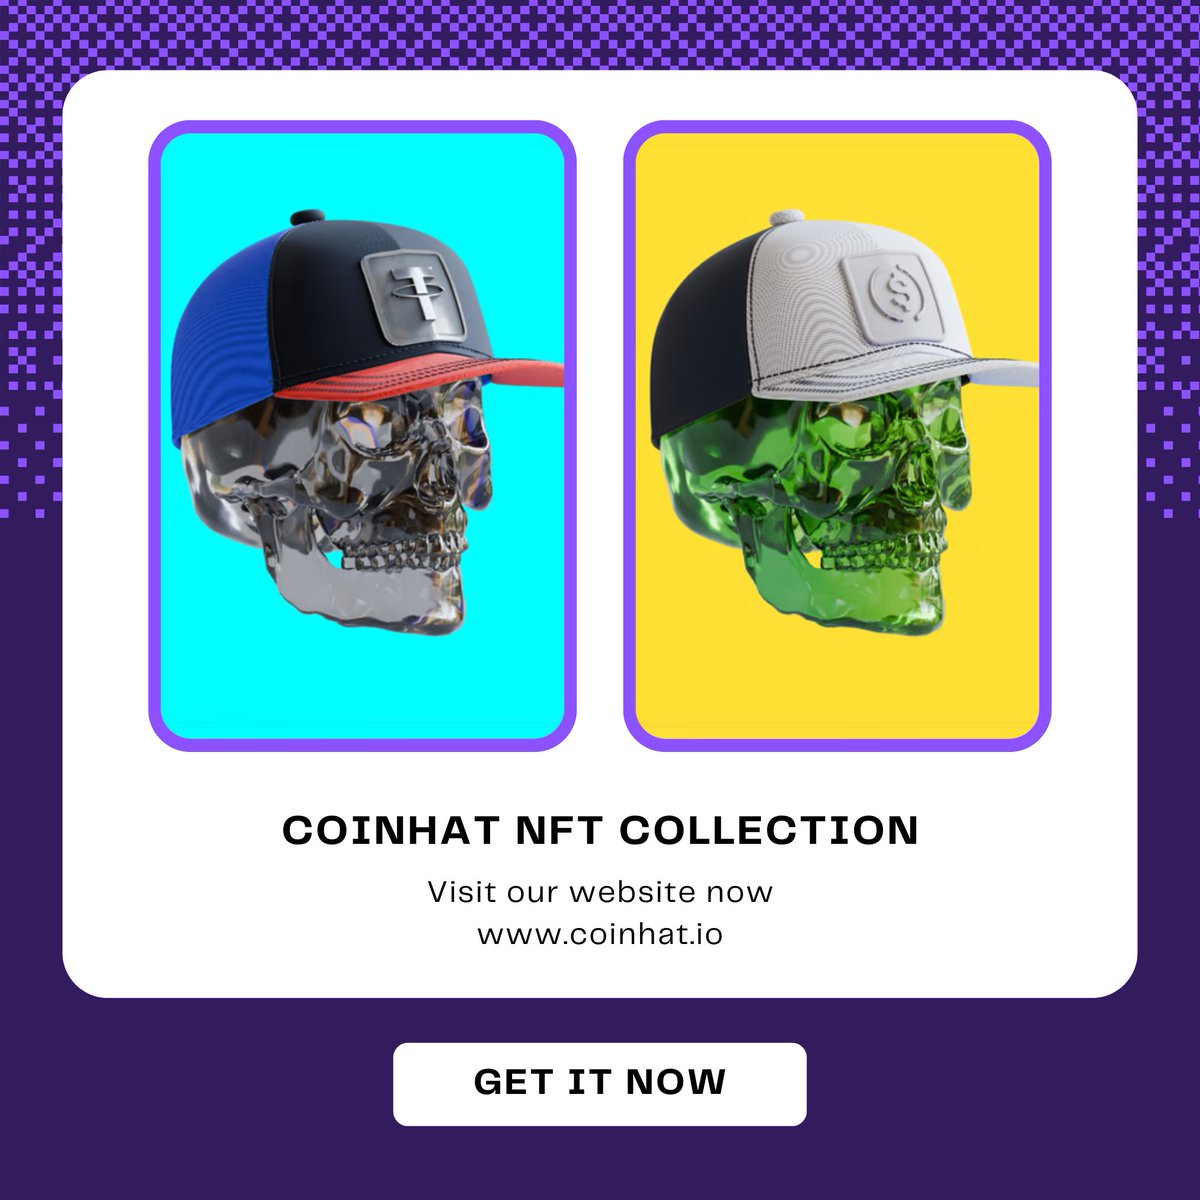 🎩New CoinHatNFT Collection is Here! 🌟

🔥Don't miss out on owning a piece of digital brilliance.

👉 Visit our OpenSea:
opensea.io/collection/coi…

#CoinHatNFT #NFTArt #NewCollection #DigitalCollectibles #CryptoArt #NFTDrop #LimitedEdition #OpenSea #GetItNow #NFTCommunity